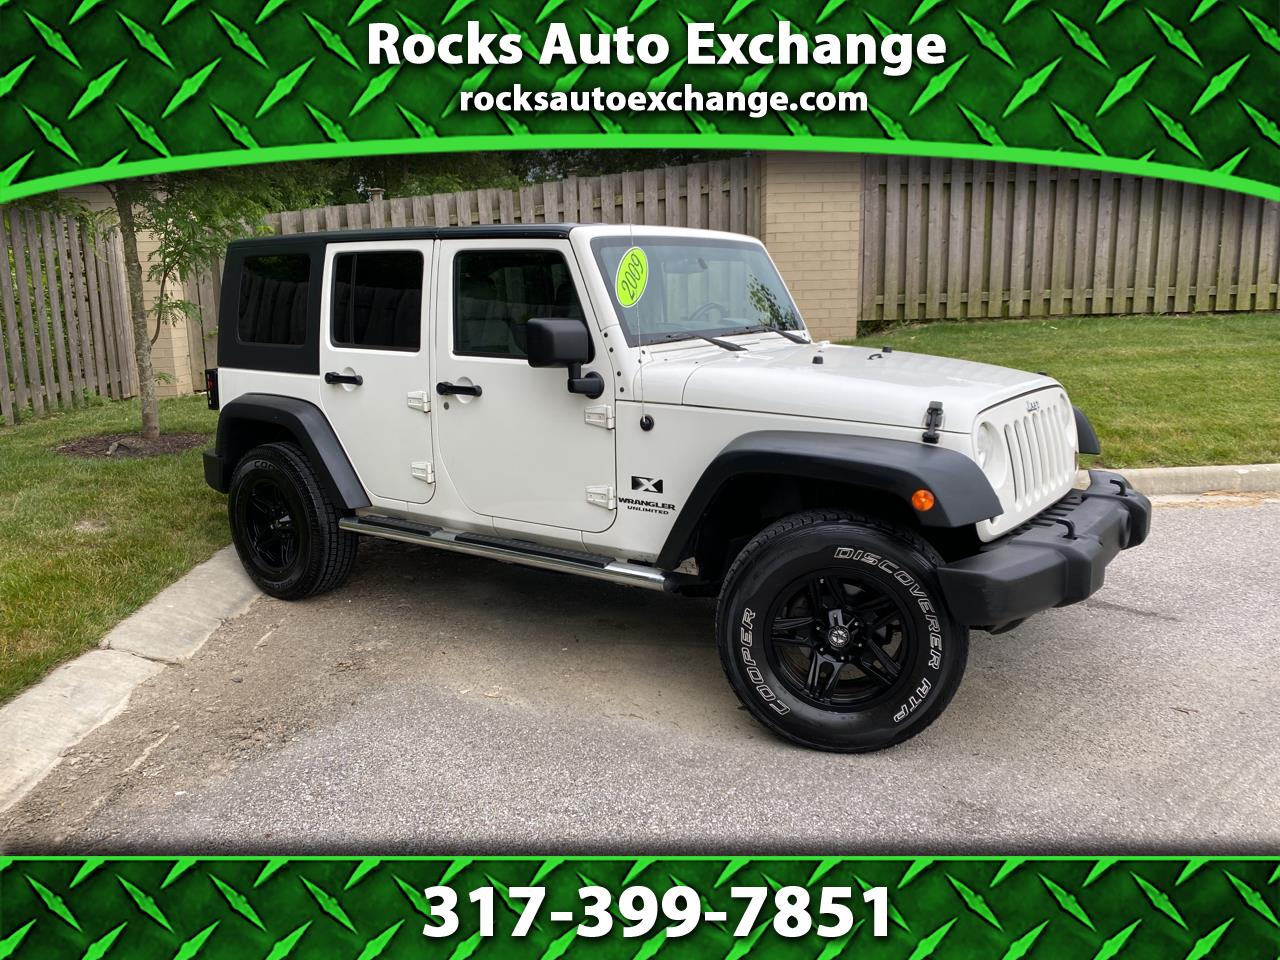 Jeep Wrangler Unlimited 4WD 4dr X 2009